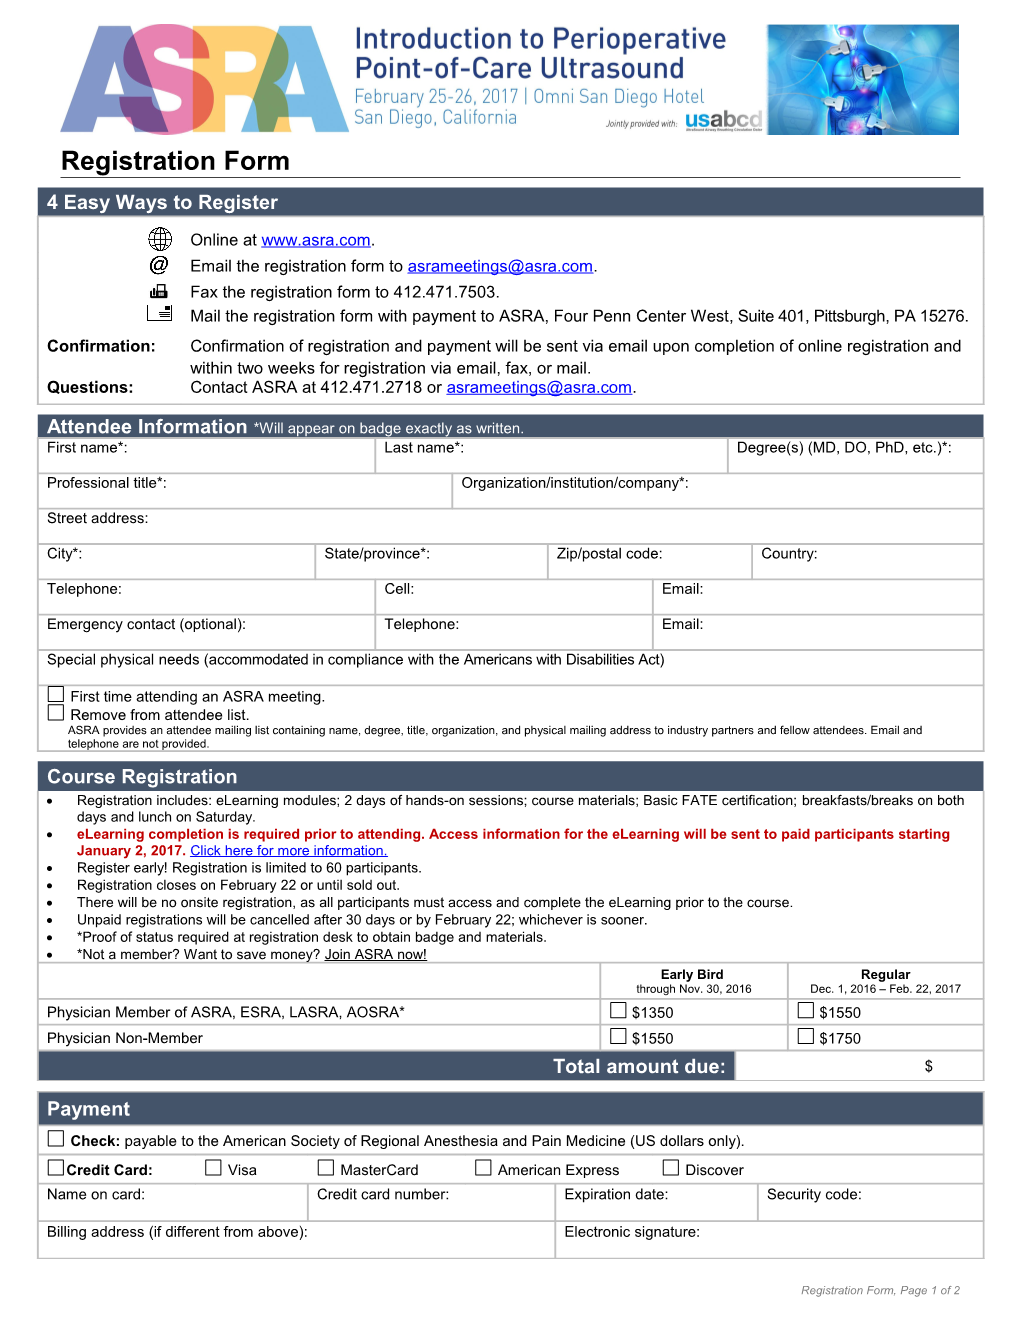 Registration Form Submit by Mail Or Fax